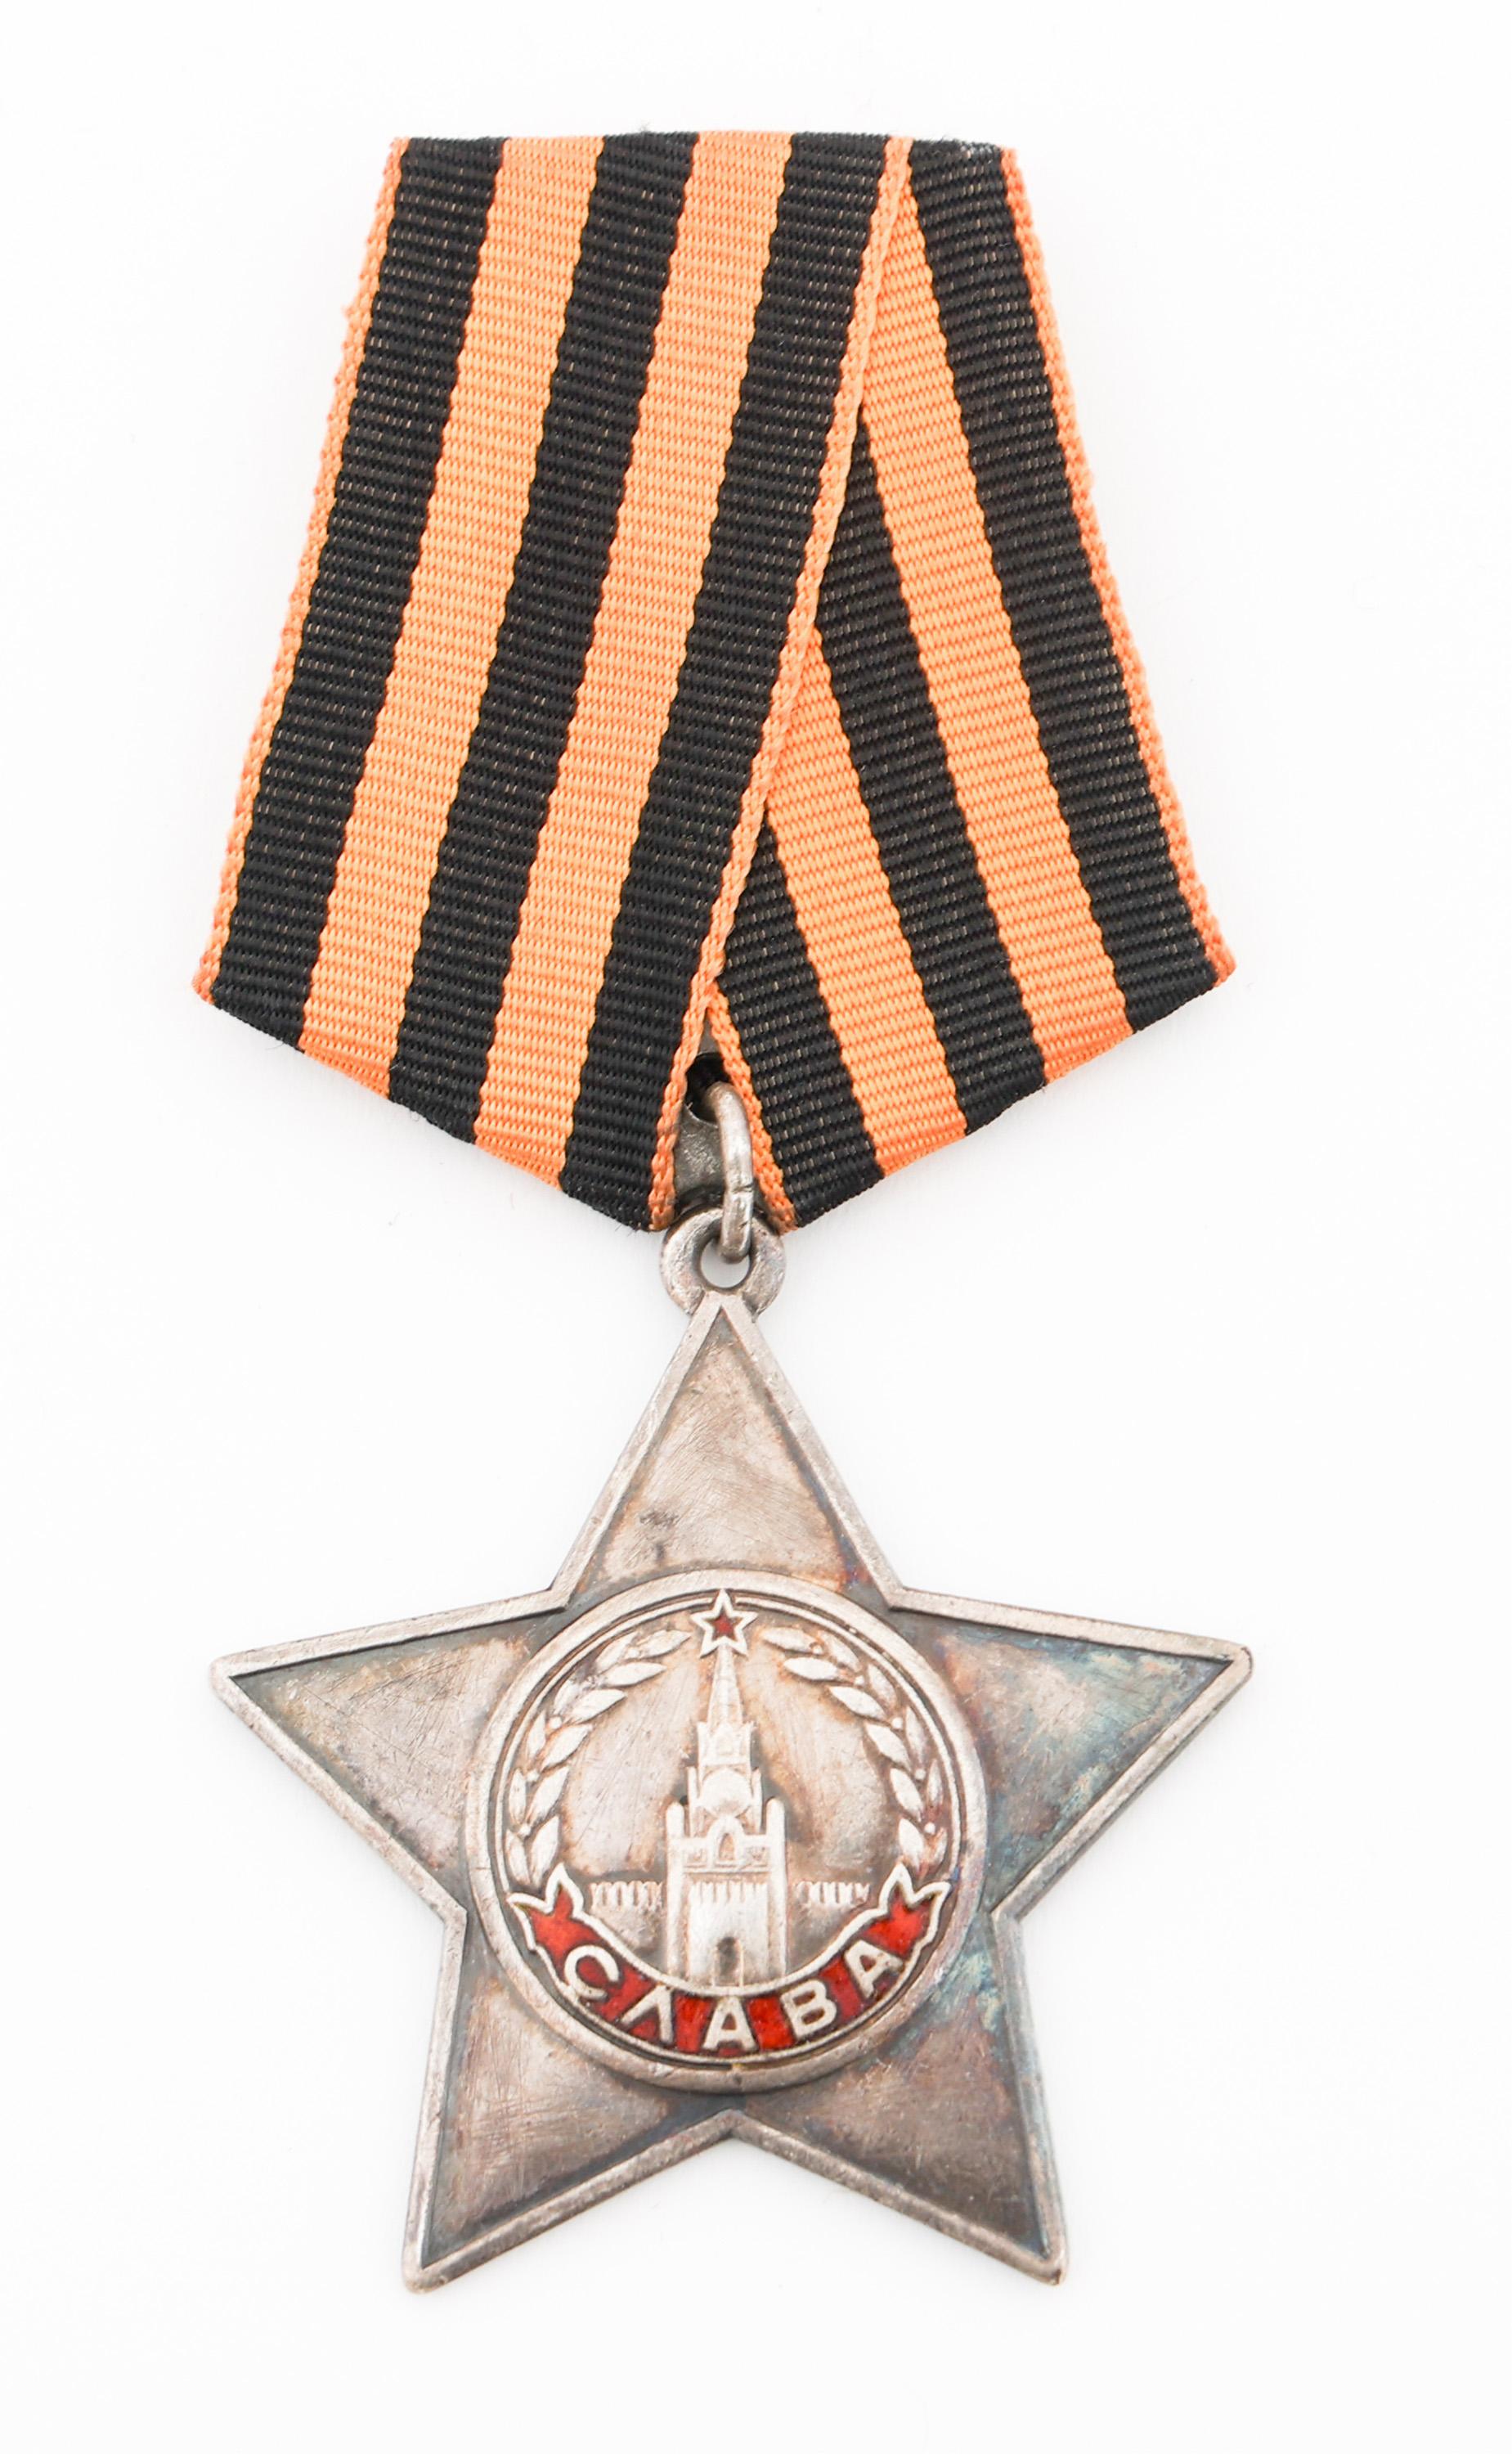 WWII - COLD WAR SOVIET ORDER OF GLORY & MEDALS